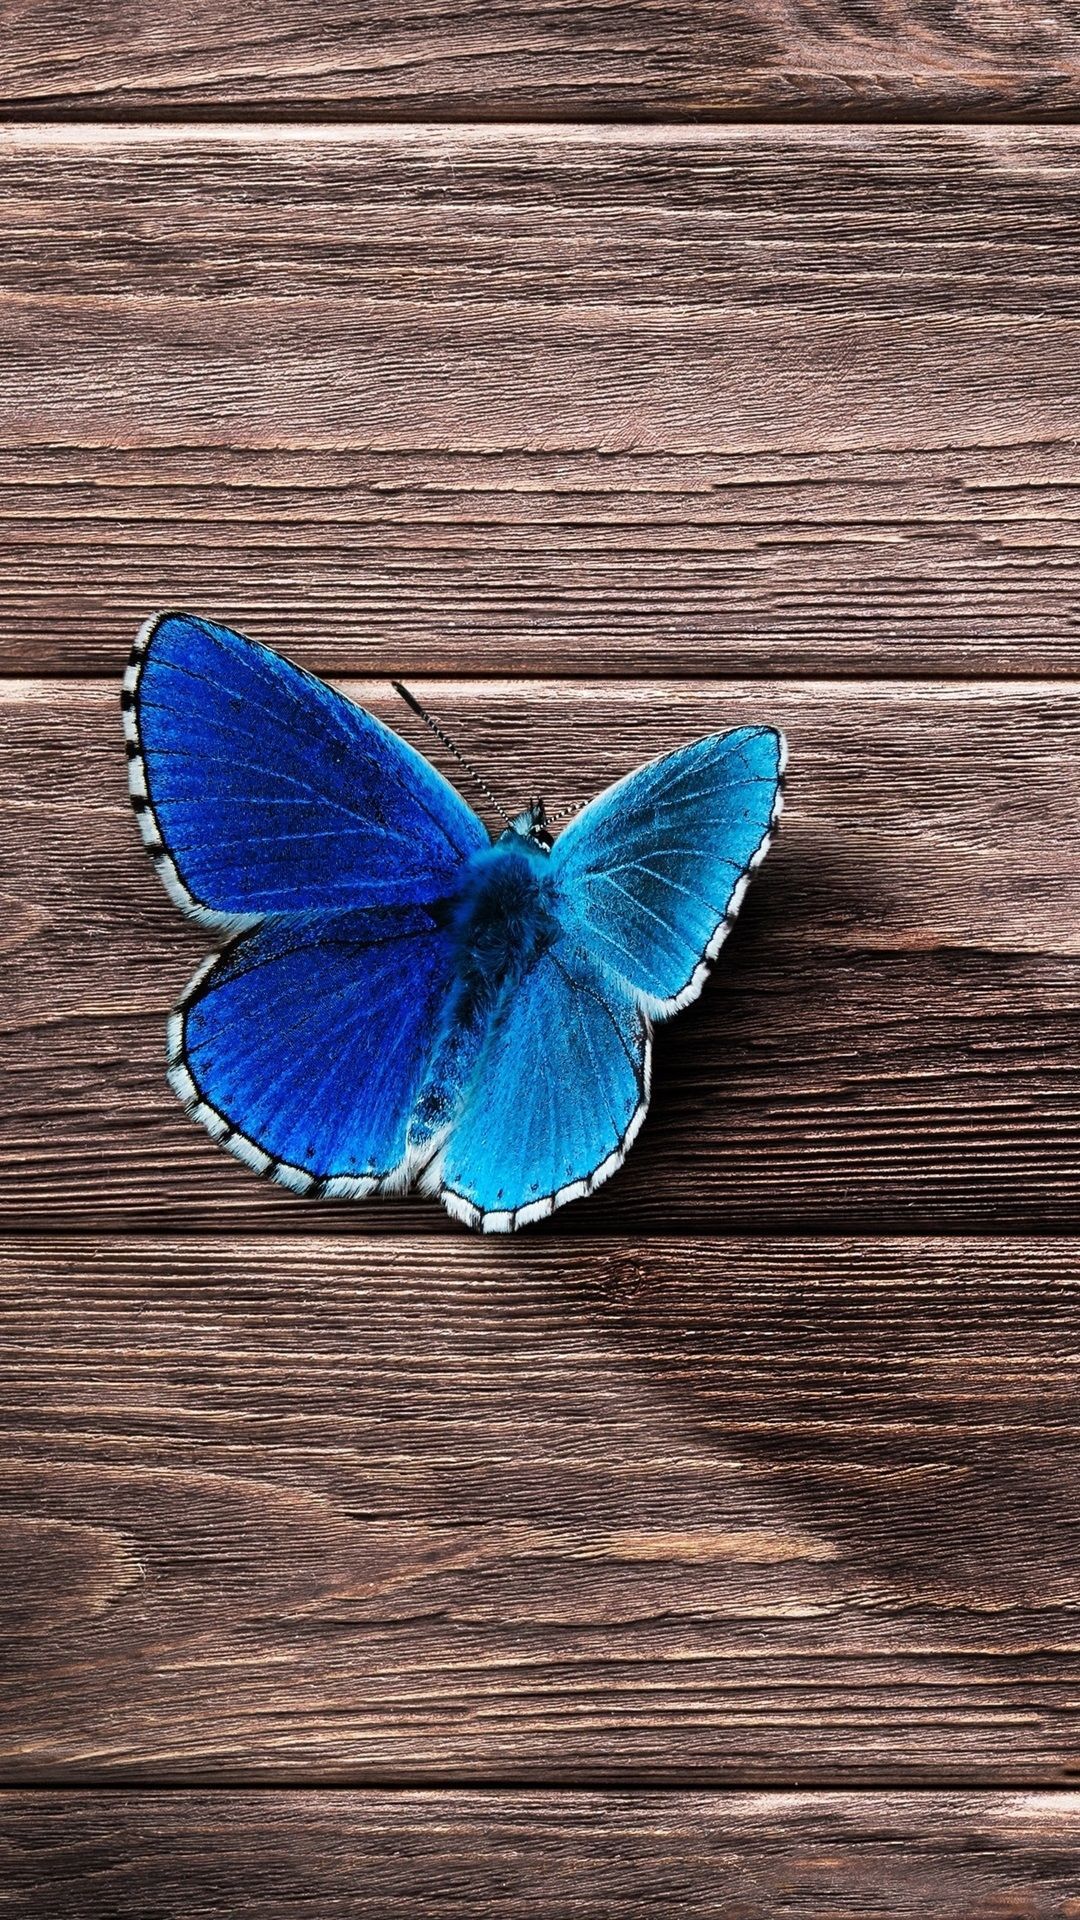 Butterfly iPhone Wallpapers